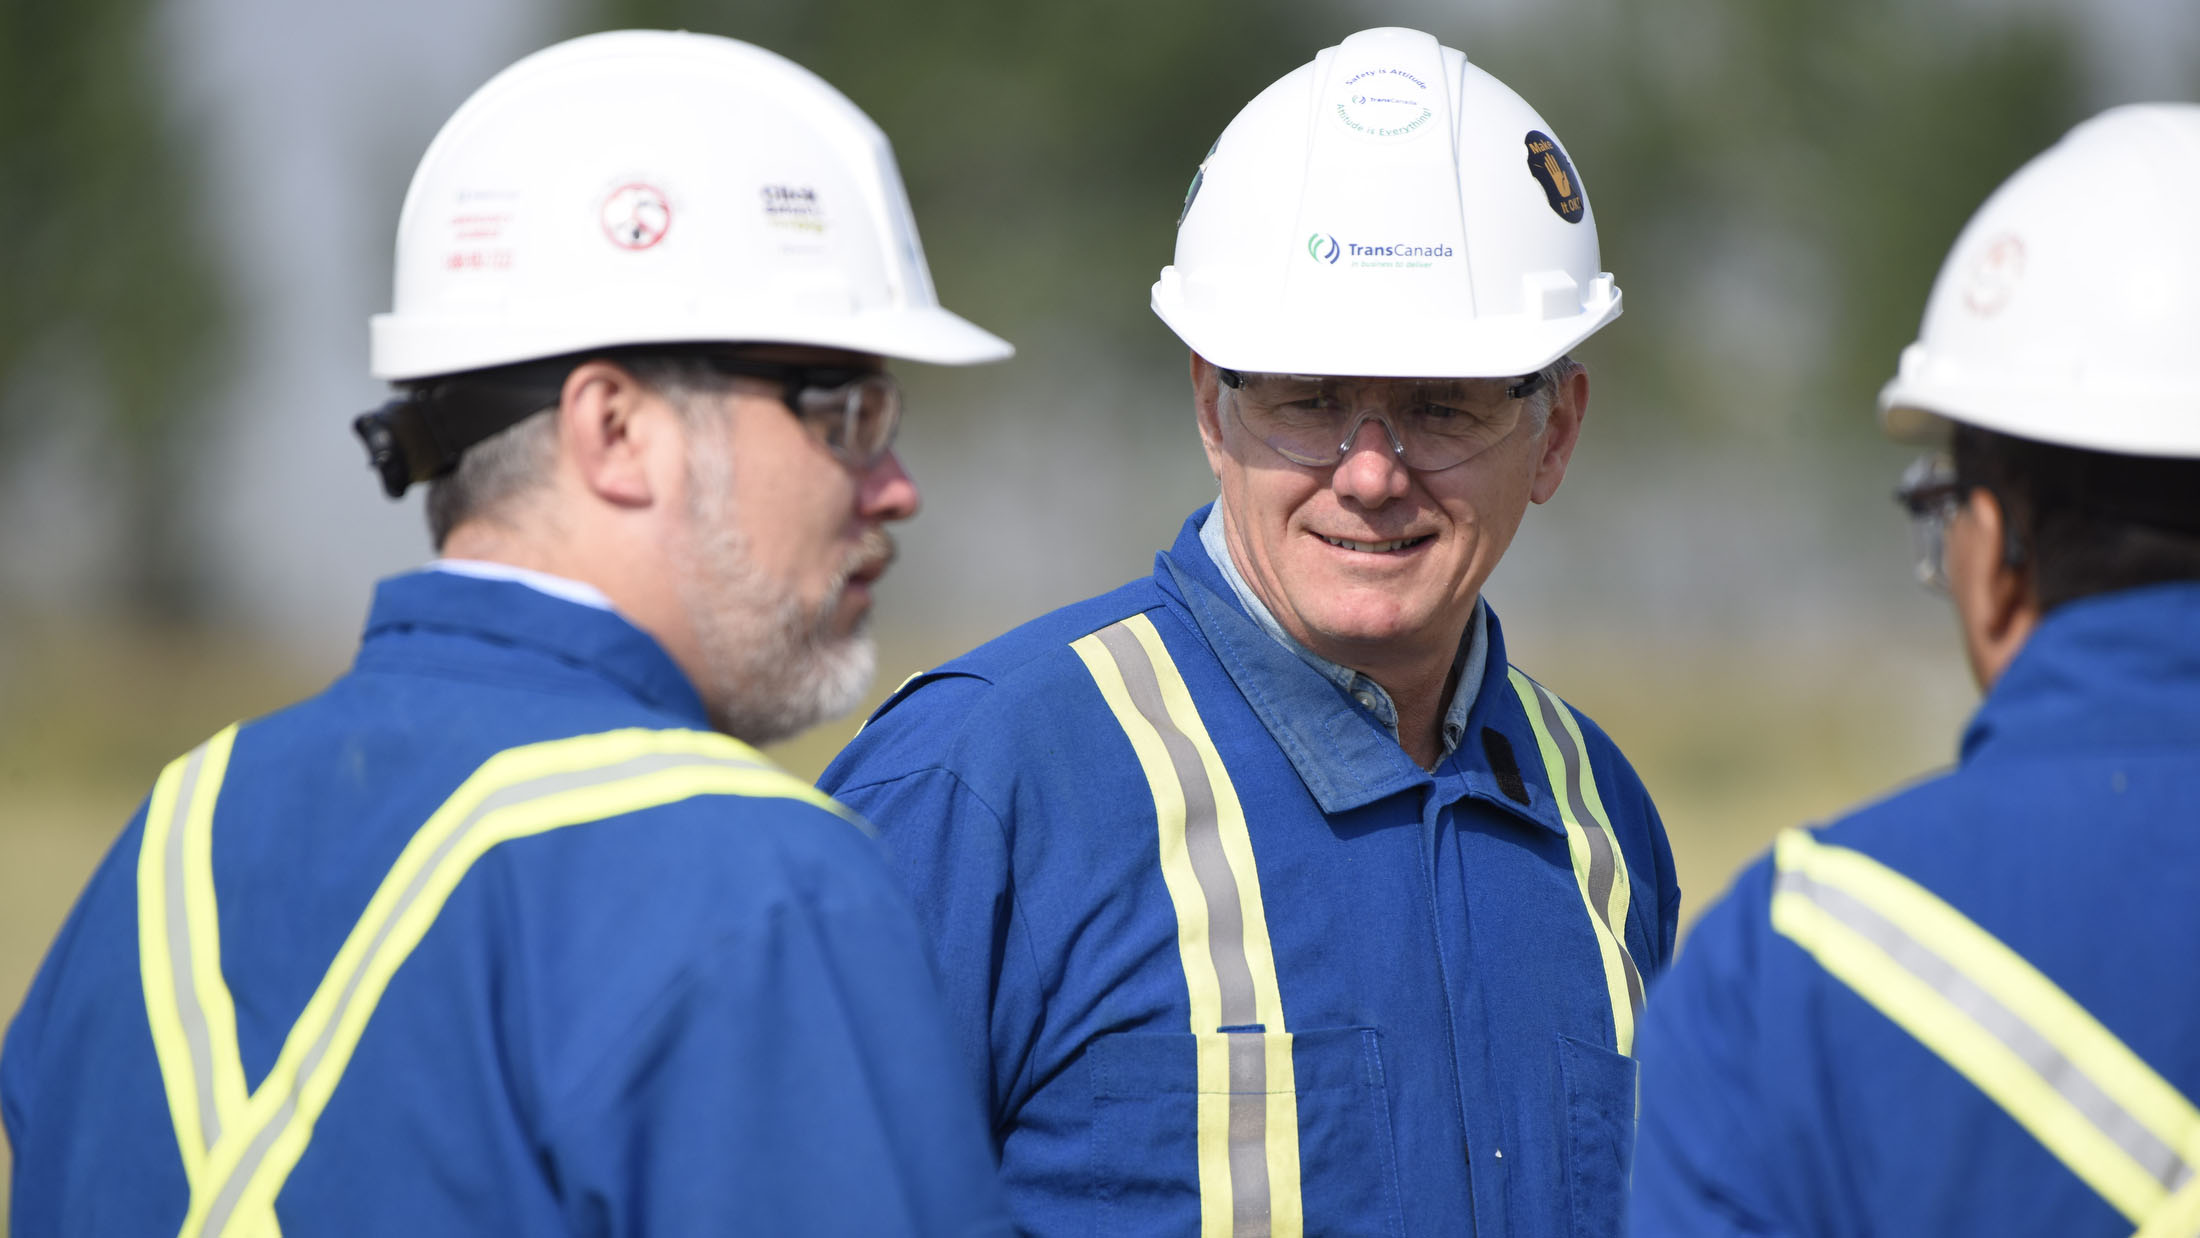 Bryce Lord, TransCanada’s Vice President of Canadian Gas Operations